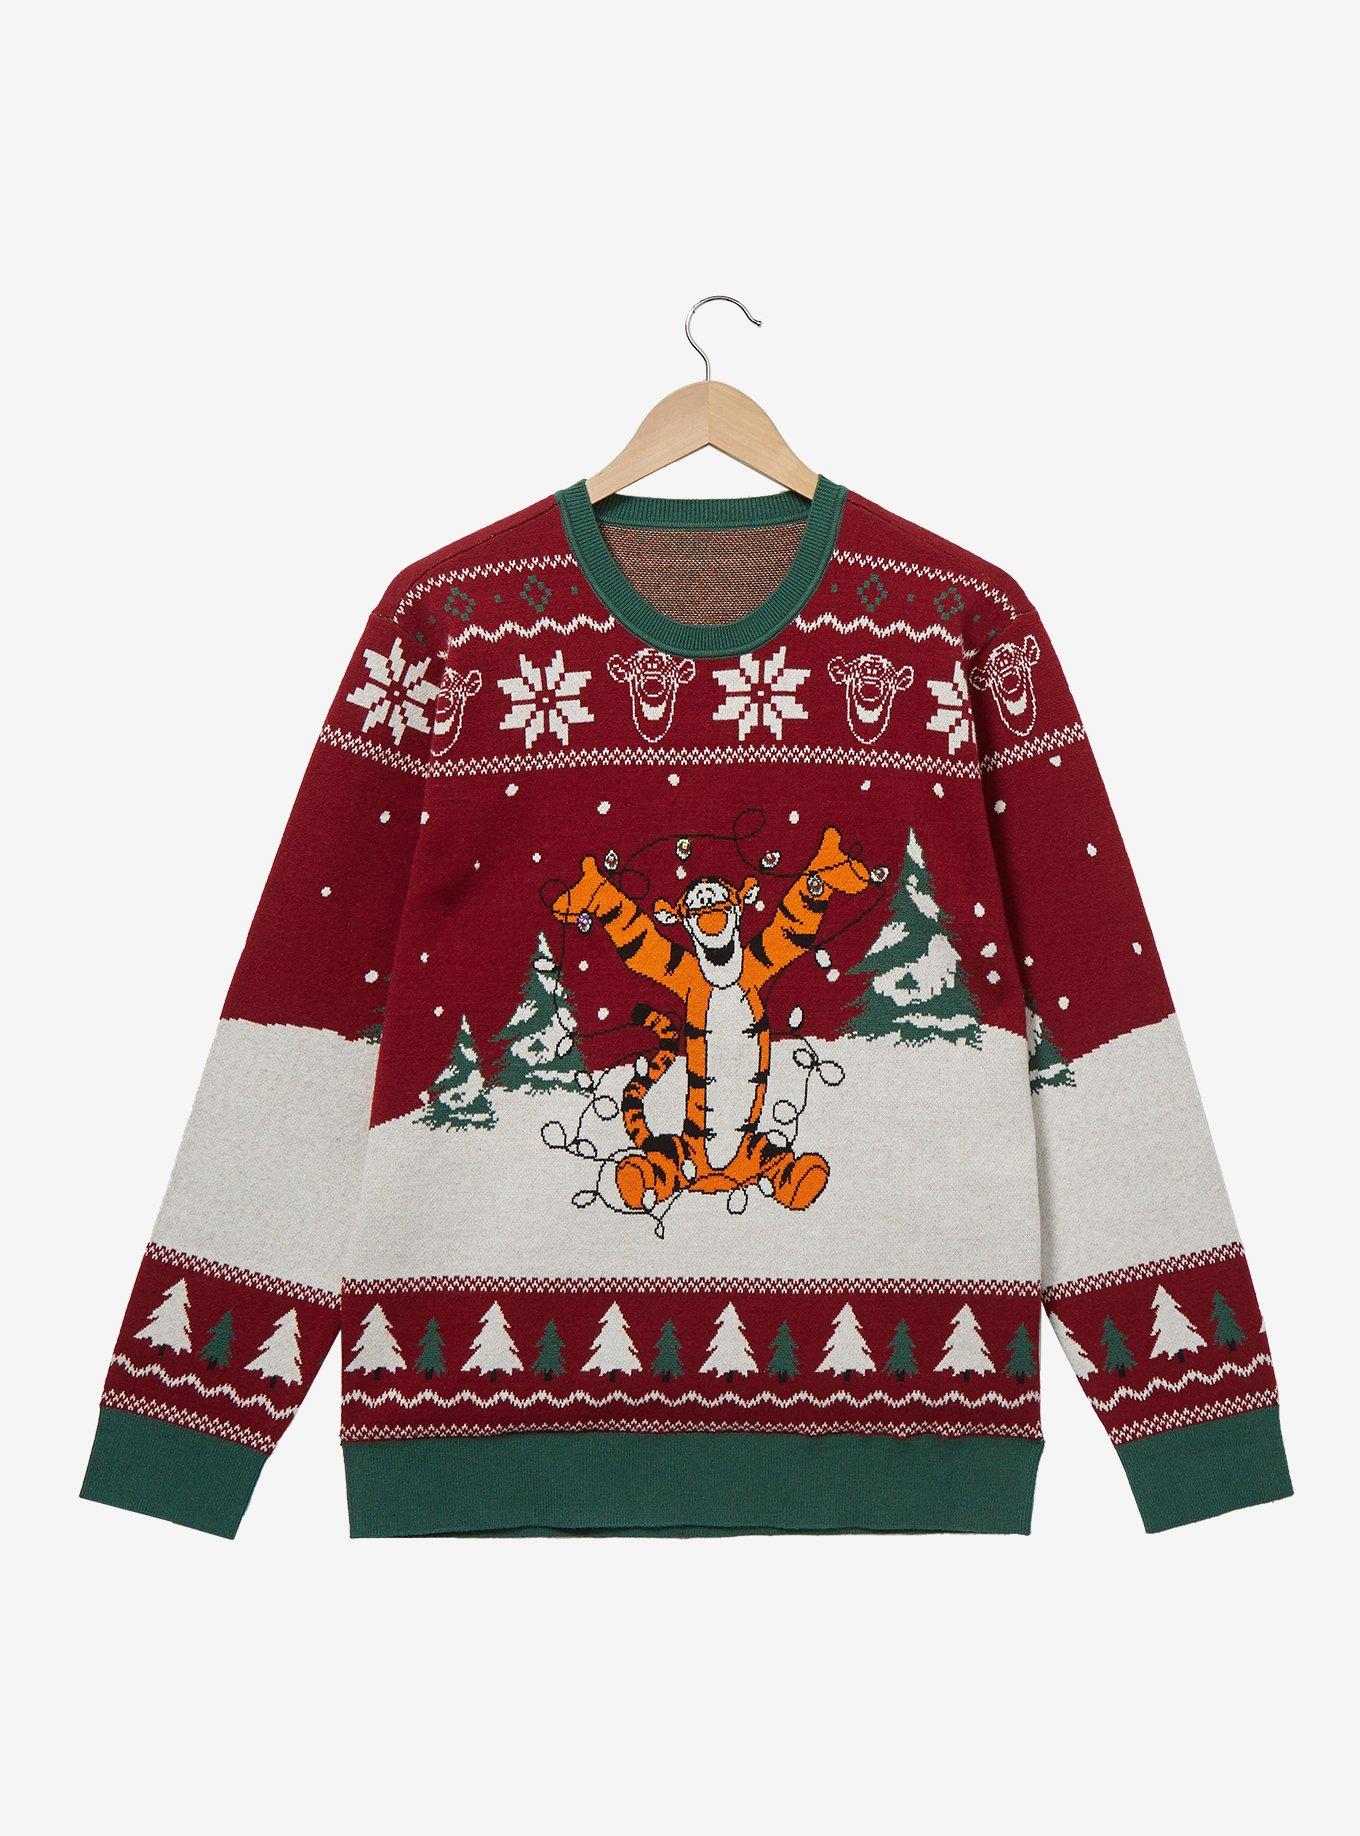 Disney Winnie the Pooh Tigger Holiday Lights Light-Up Sweater - BoxLunch Exclusive, RED, hi-res